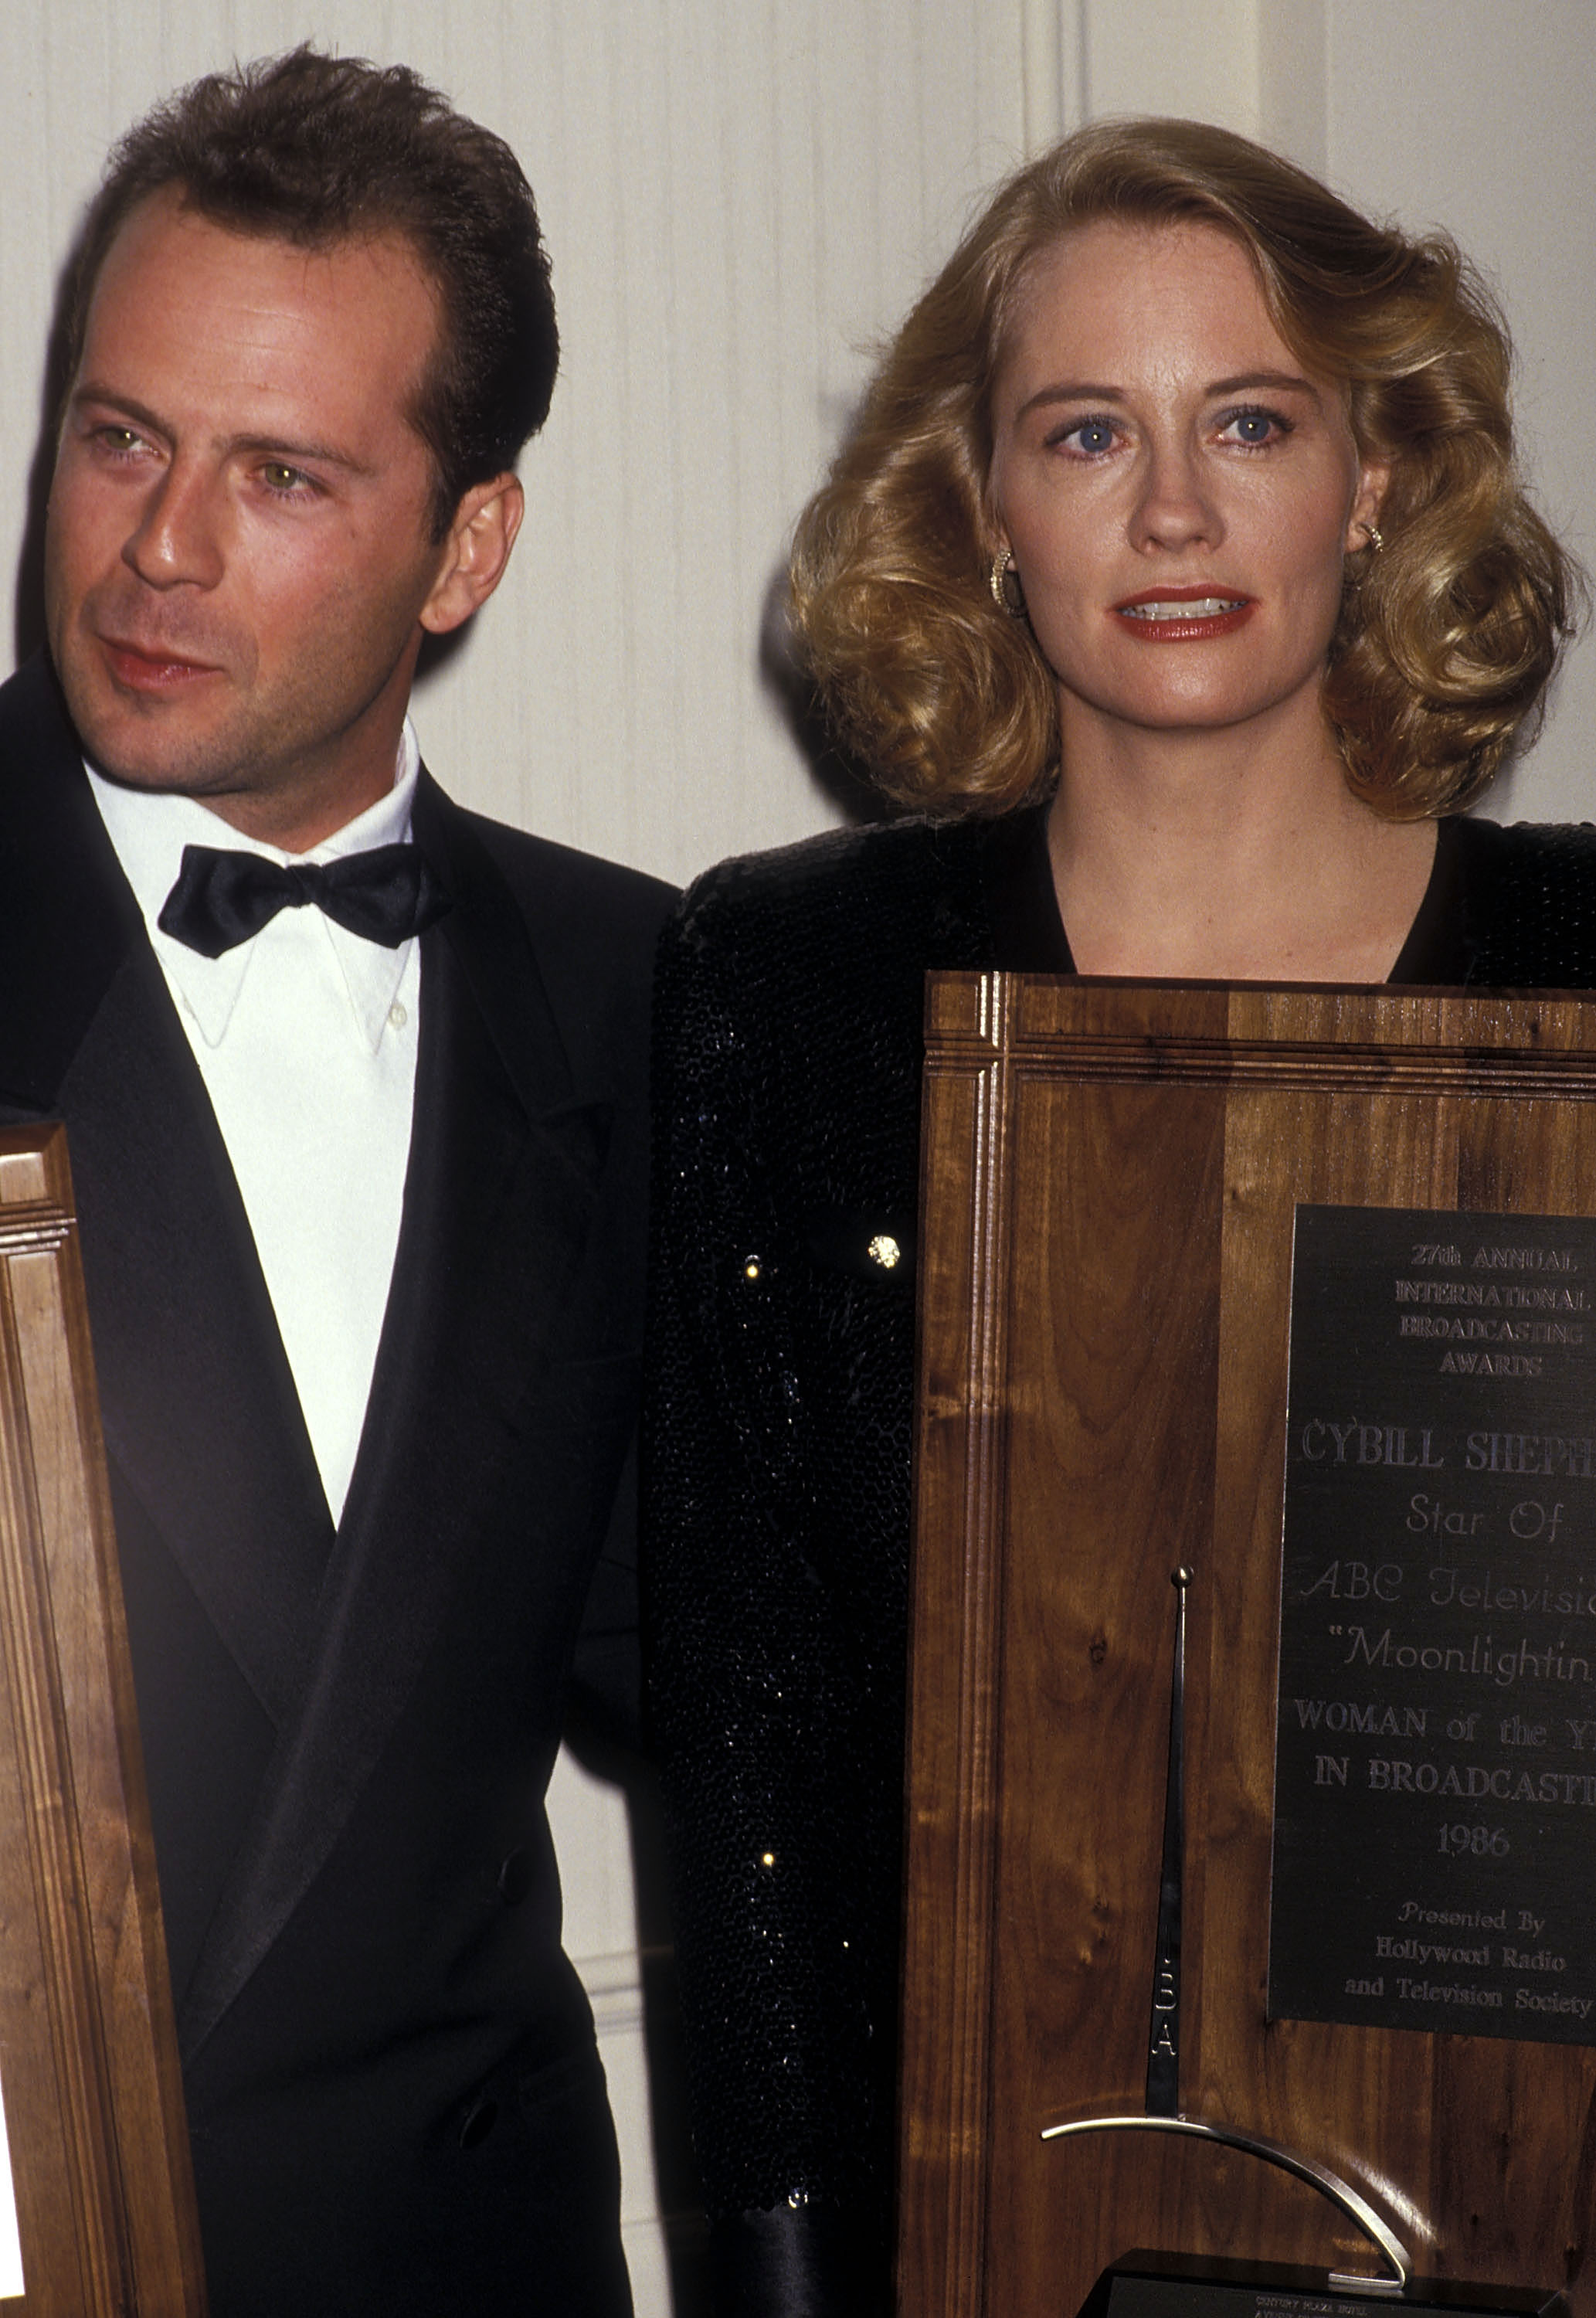 Bruce Willis and Cybill Shepherd at the Hollywood Radio & Television Society's 27th Annual International Broadcasting Awards on March 17, 1987, in Los Angeles, California. | Source: Getty Images